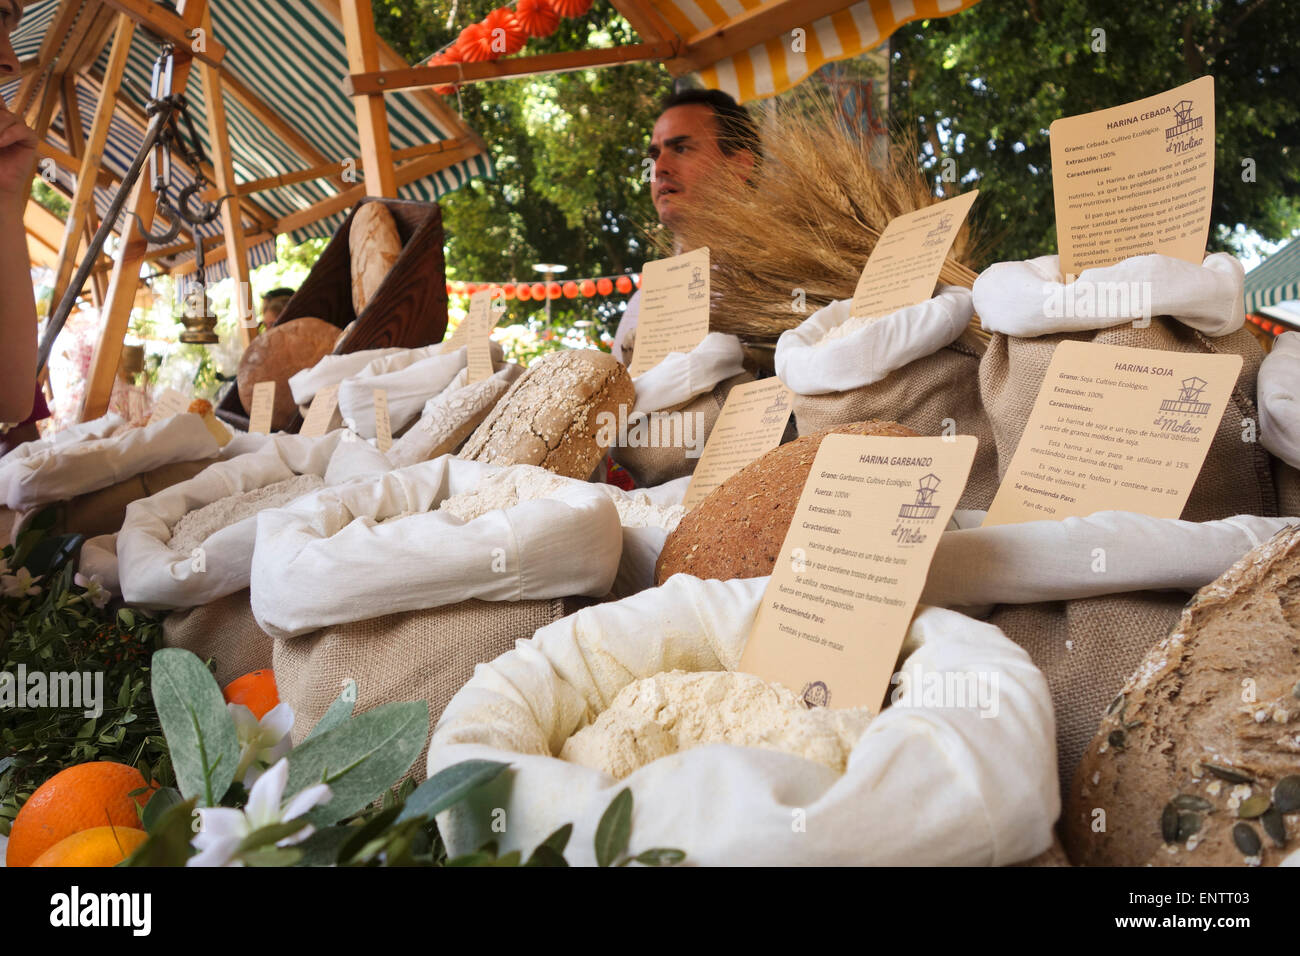 Different flour for bread, grinded by local mill on display at outdoor market. Andalusia, Spain. Stock Photo